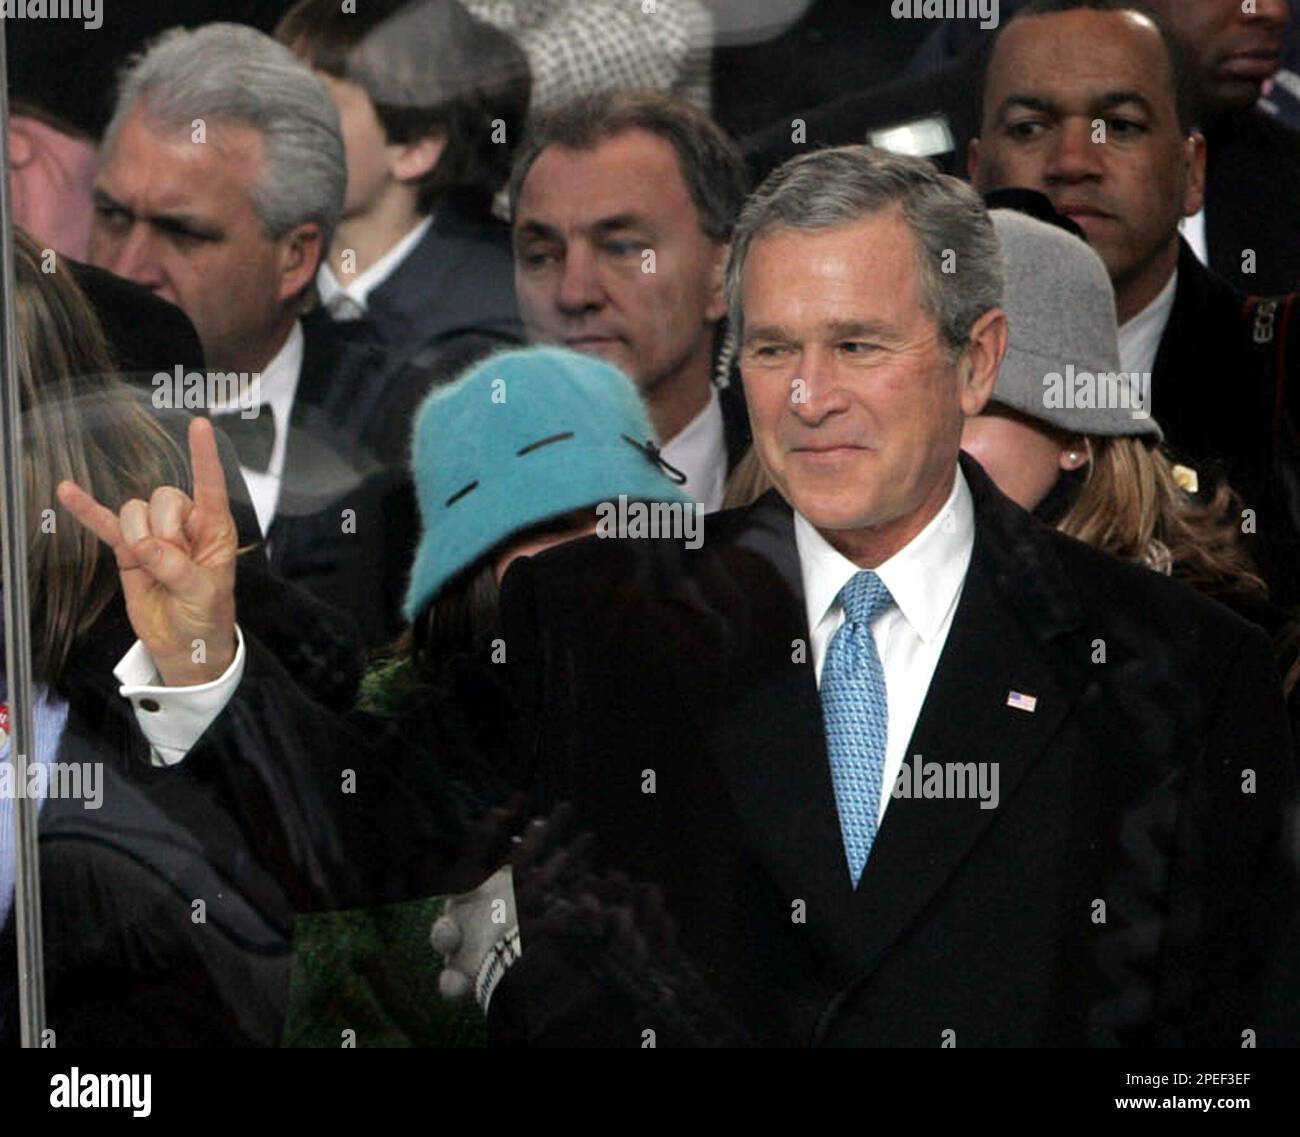 President Bush gestures the ""Hook 'em, 'horns" salute of the University of Texas Longhorns as he and his family watch the Inaugural Parade Thursday Jan. 20, 2005, in Washington. President Bush's "Hook 'em, 'horns" salute got lost in translation in Norway, where shocked people interpreted his hand gesture during his inauguration as a salute to Satan. (AP Photo/J. Scott Applewhite) Stock Photo